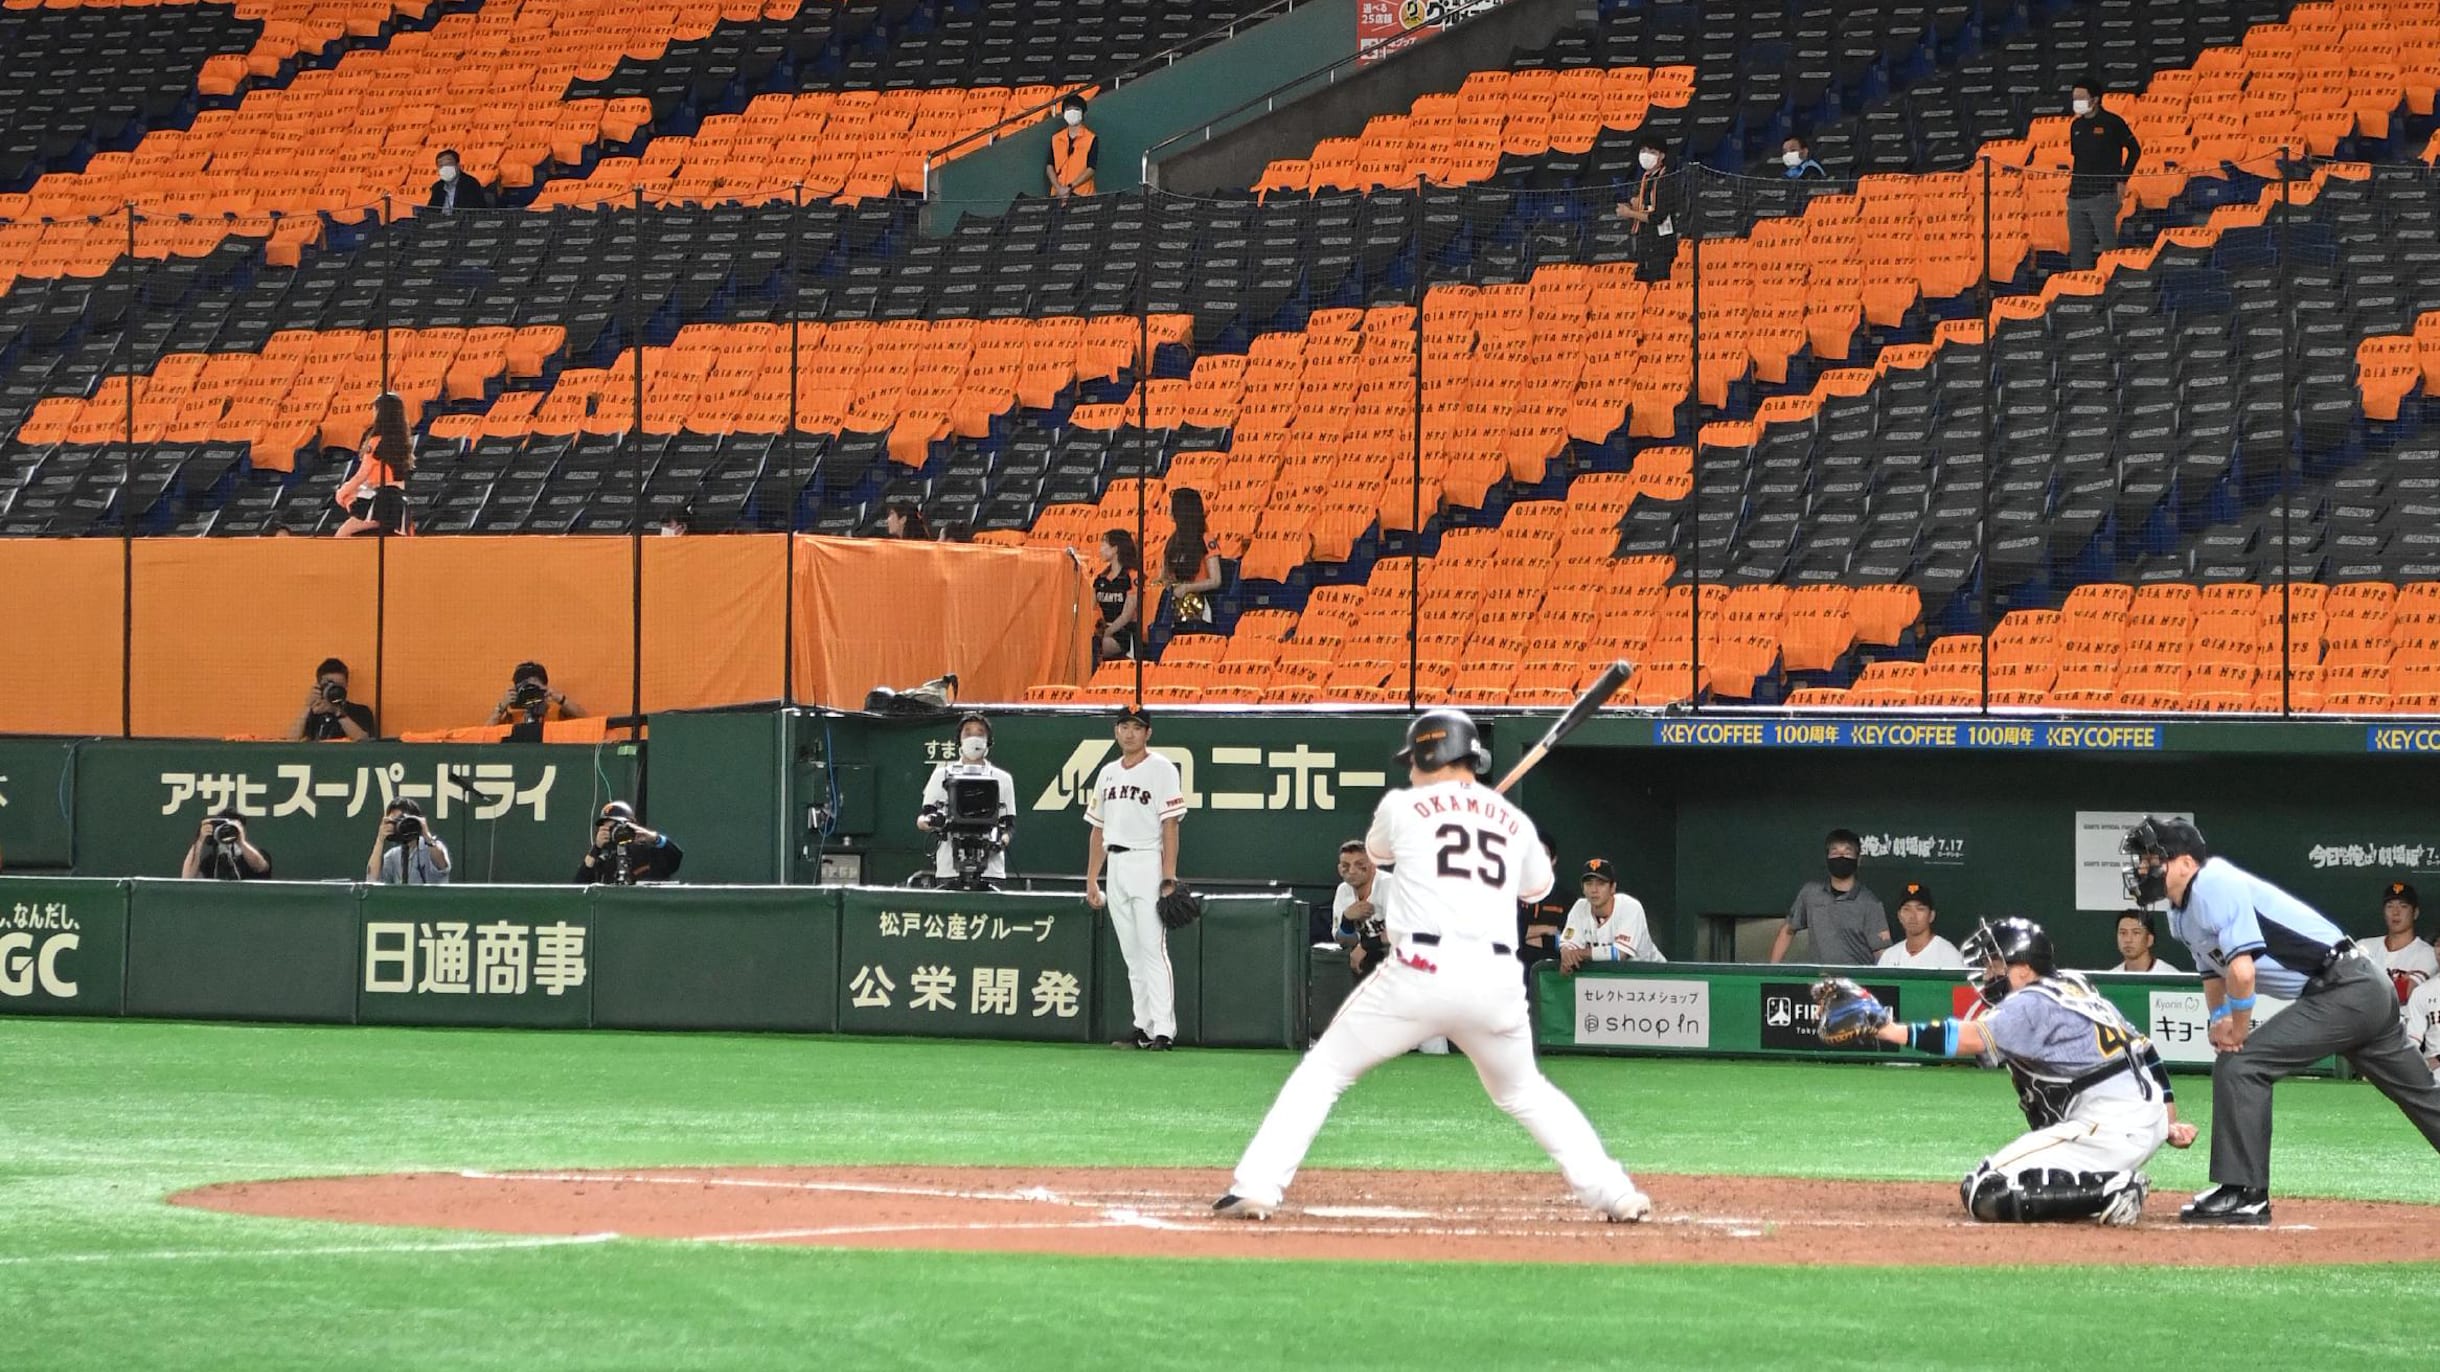 Sport returns to Japan as baseball season opens after 3-month delay